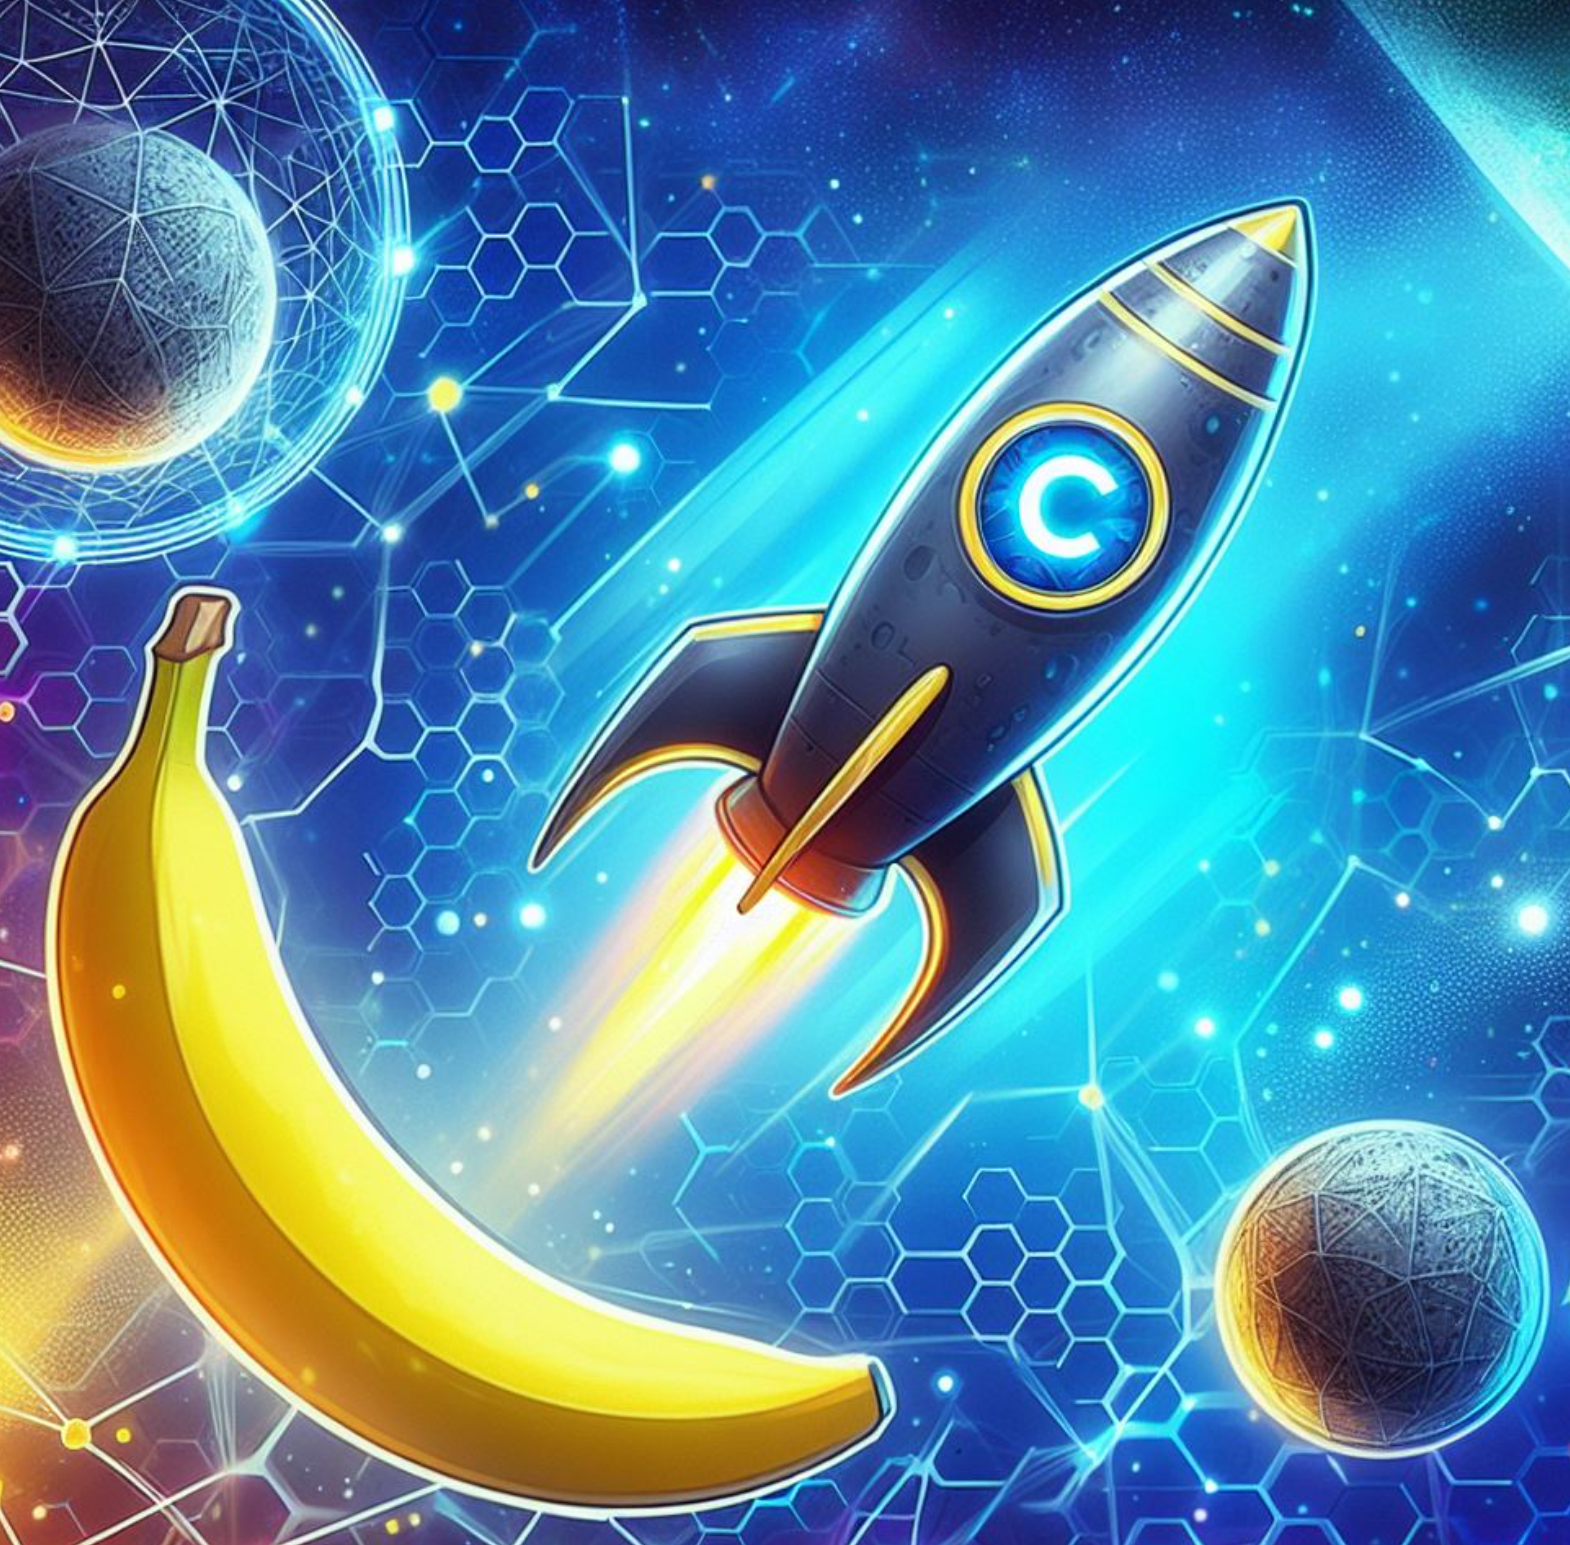 A cosmic-themed thumbnail featuring a stylized rocket ship (representing Cronos) soaring toward the stars, with a banana (symbolizing scalability) orbiting alongside. The background could be a blend of blockchain patterns and celestial imagery